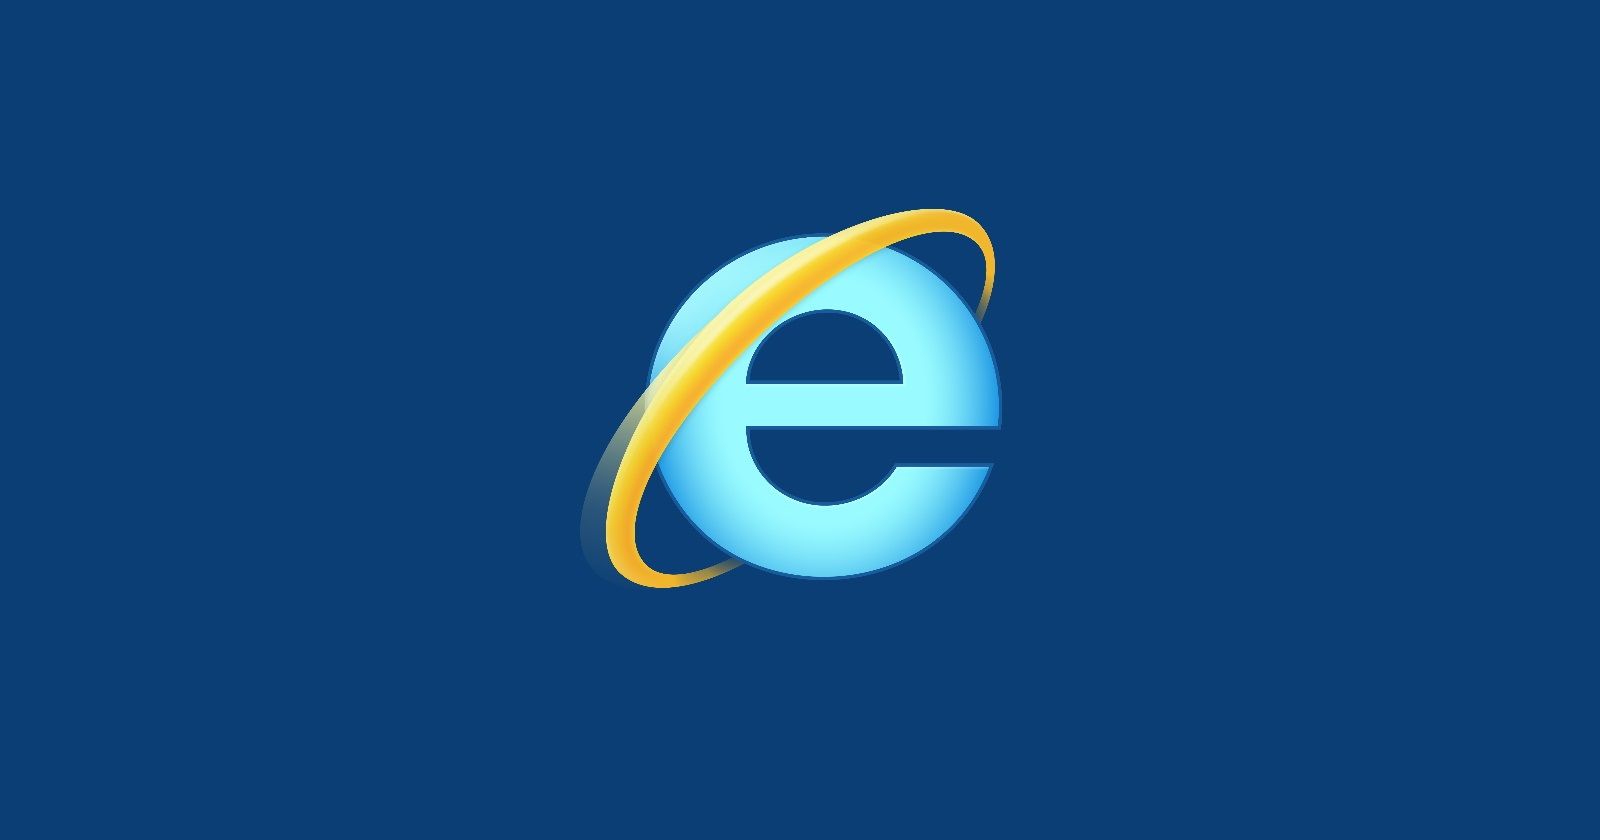 On June 15, 27 years old Internet Explorer will stop its service